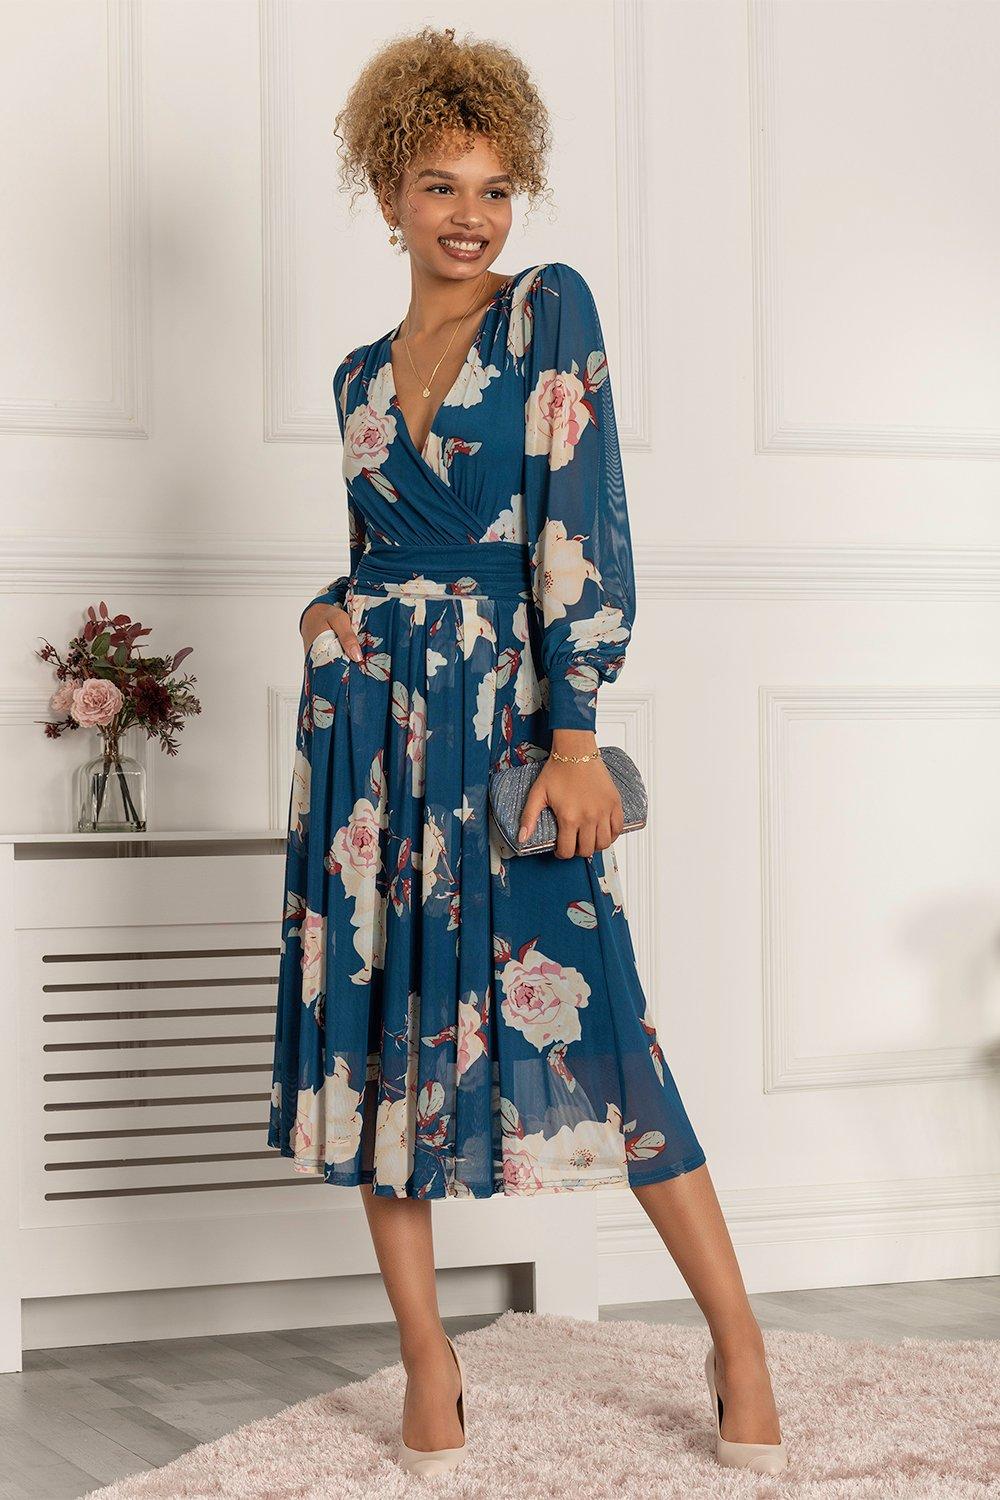 debenhams occasion wear dresses for Sale,Up To OFF 75%